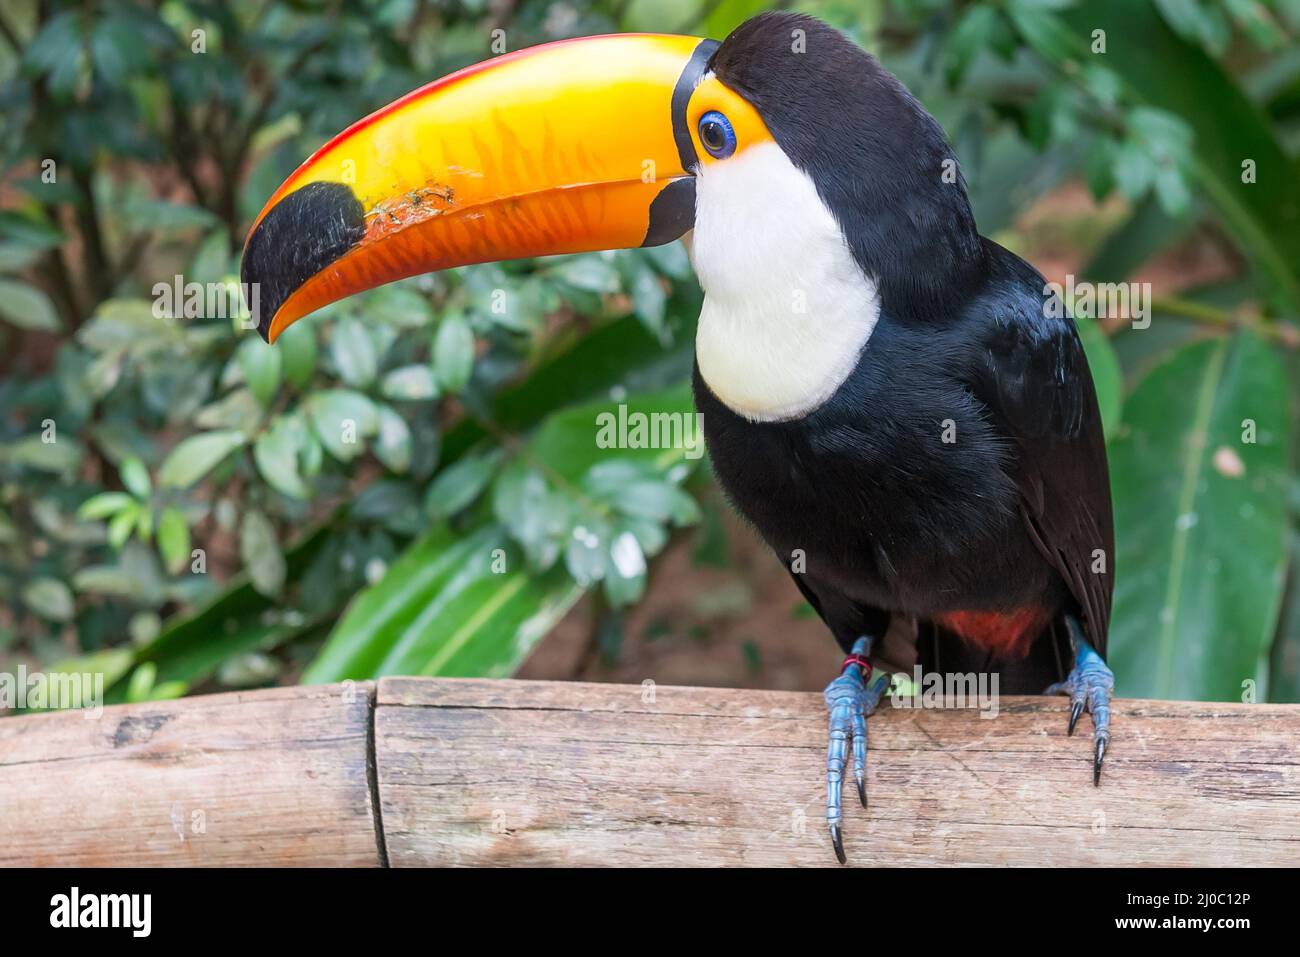 Toucan bird in a tree branch at the forest Stock Photo